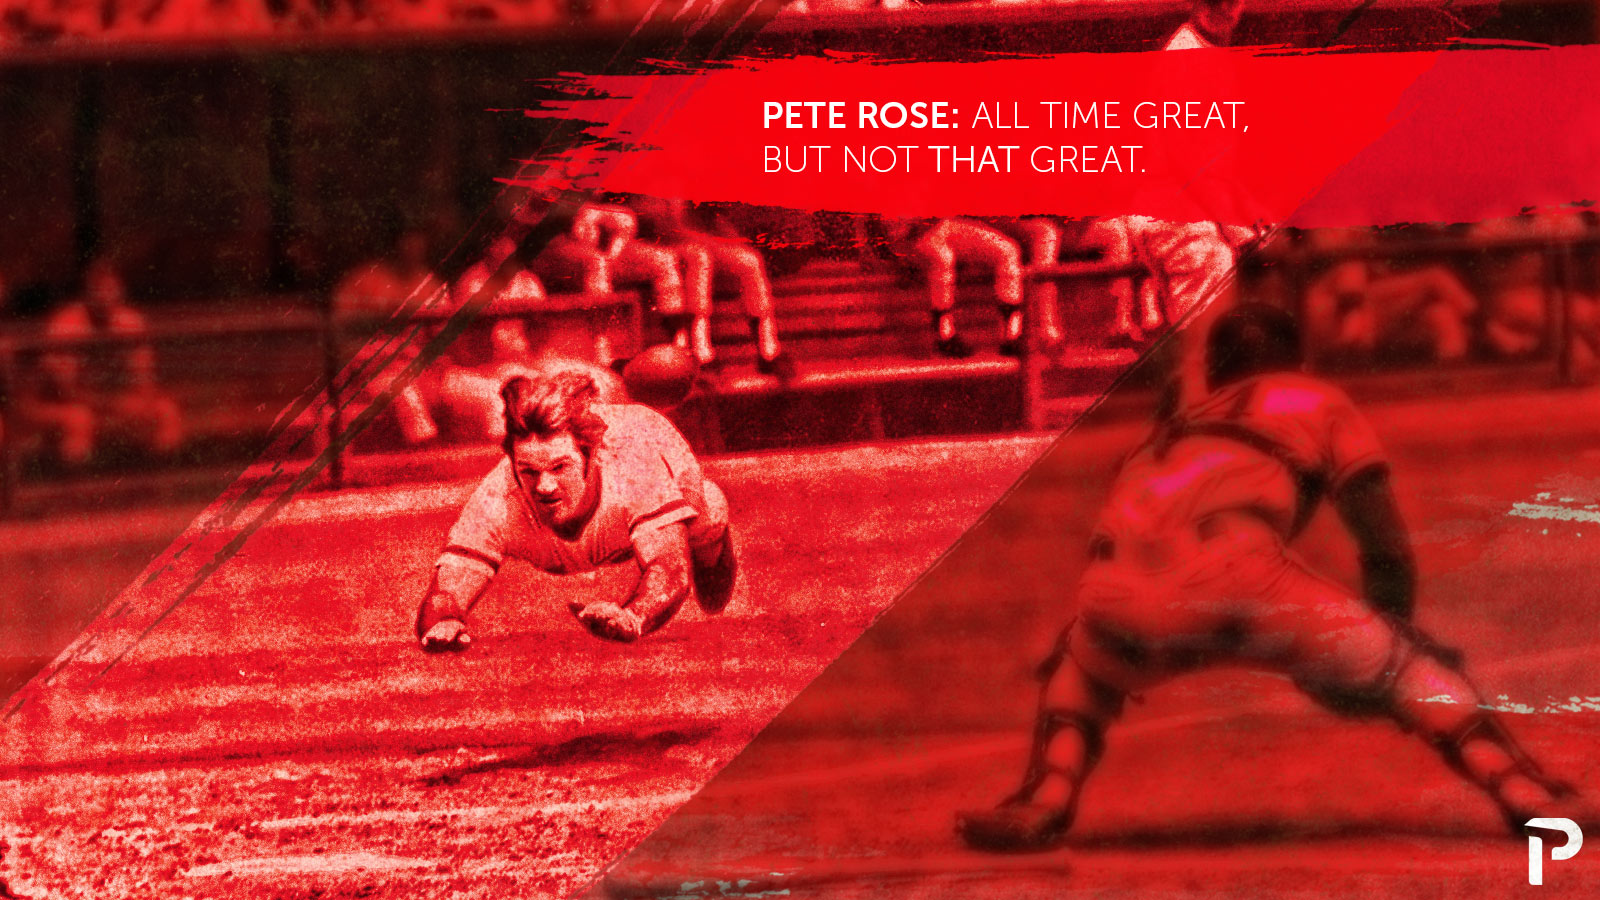 Pete Rose: All Time Great, But Not That Great.